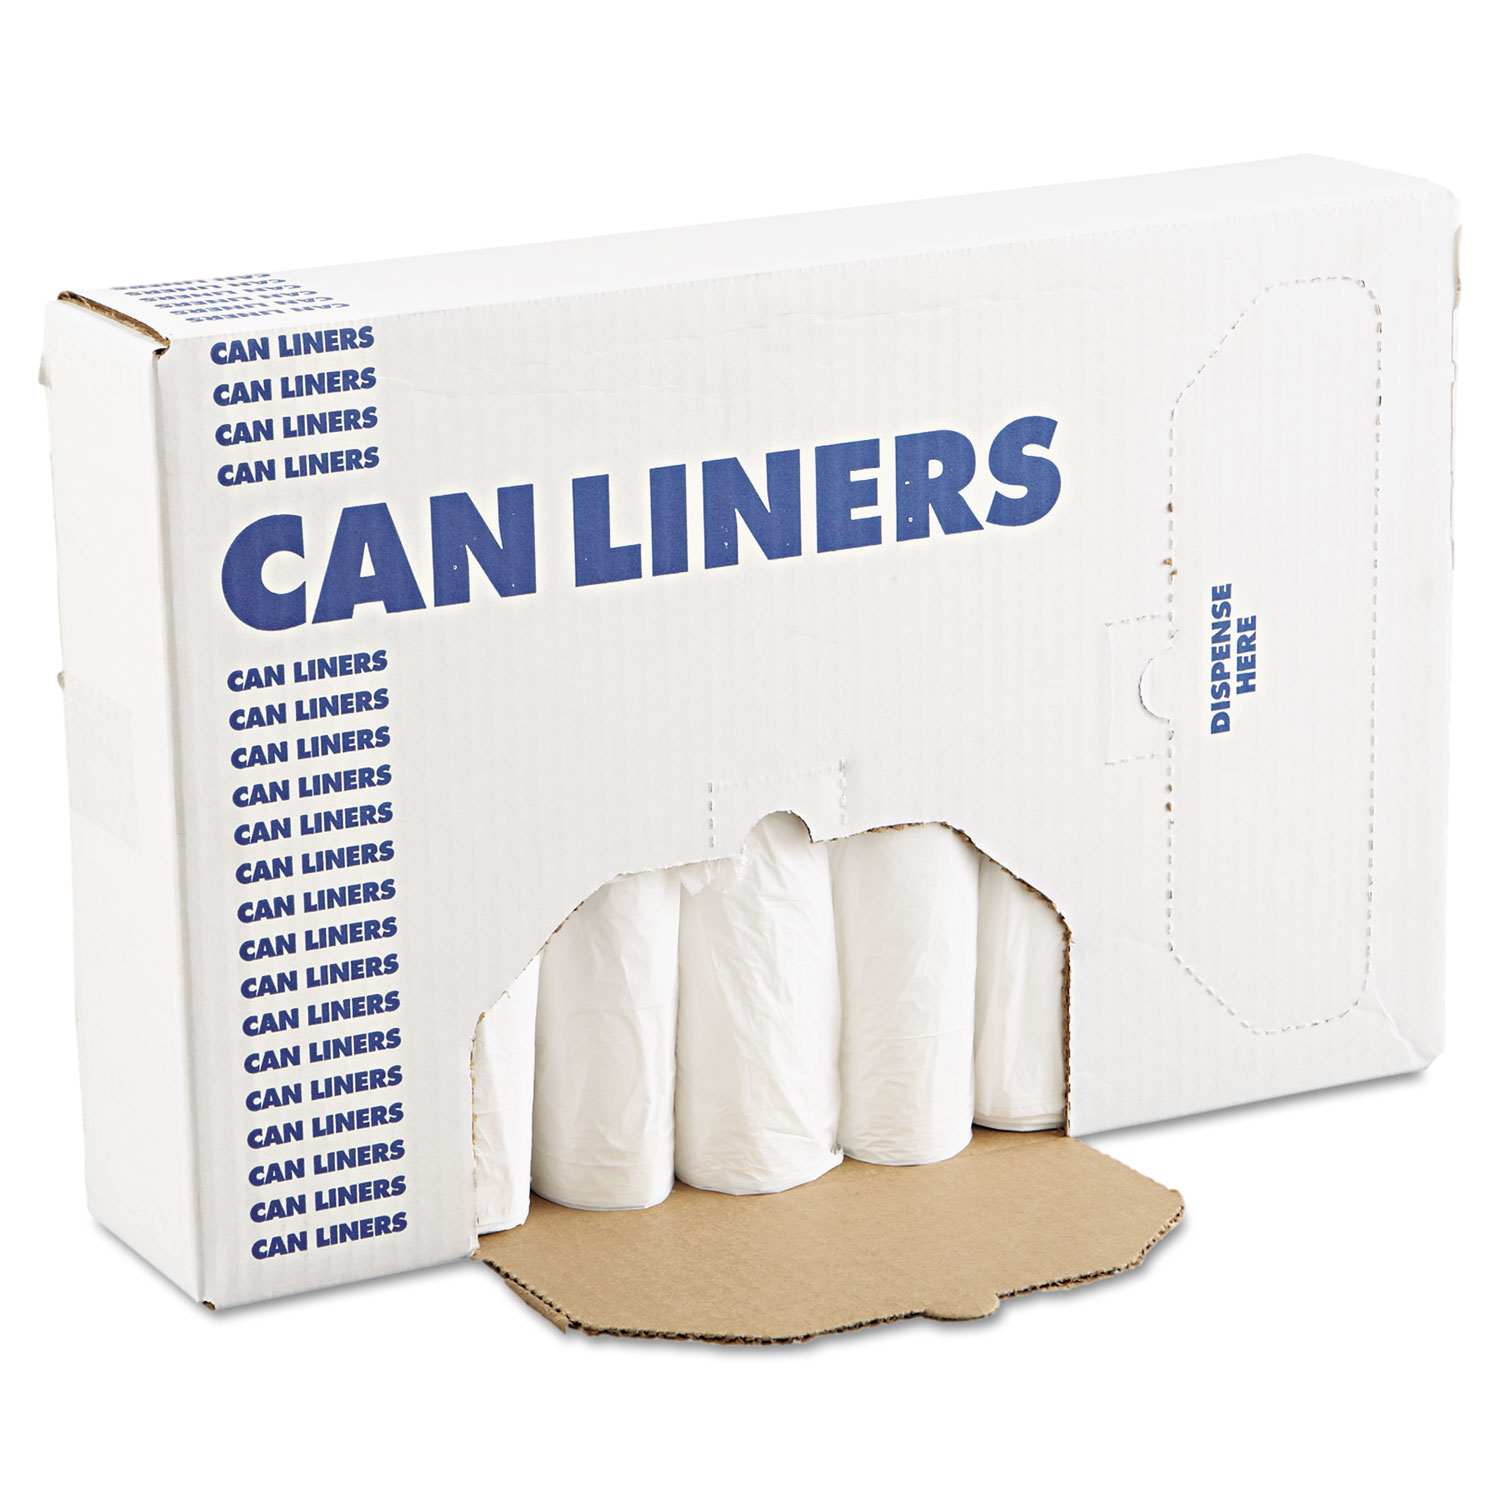  Boardwalk H4832LWKR01 Low-Density Waste Can Liners, 16 gal, 0.4 mil, 24 x 32, White, 500/Carton (BWK2432EXH) 